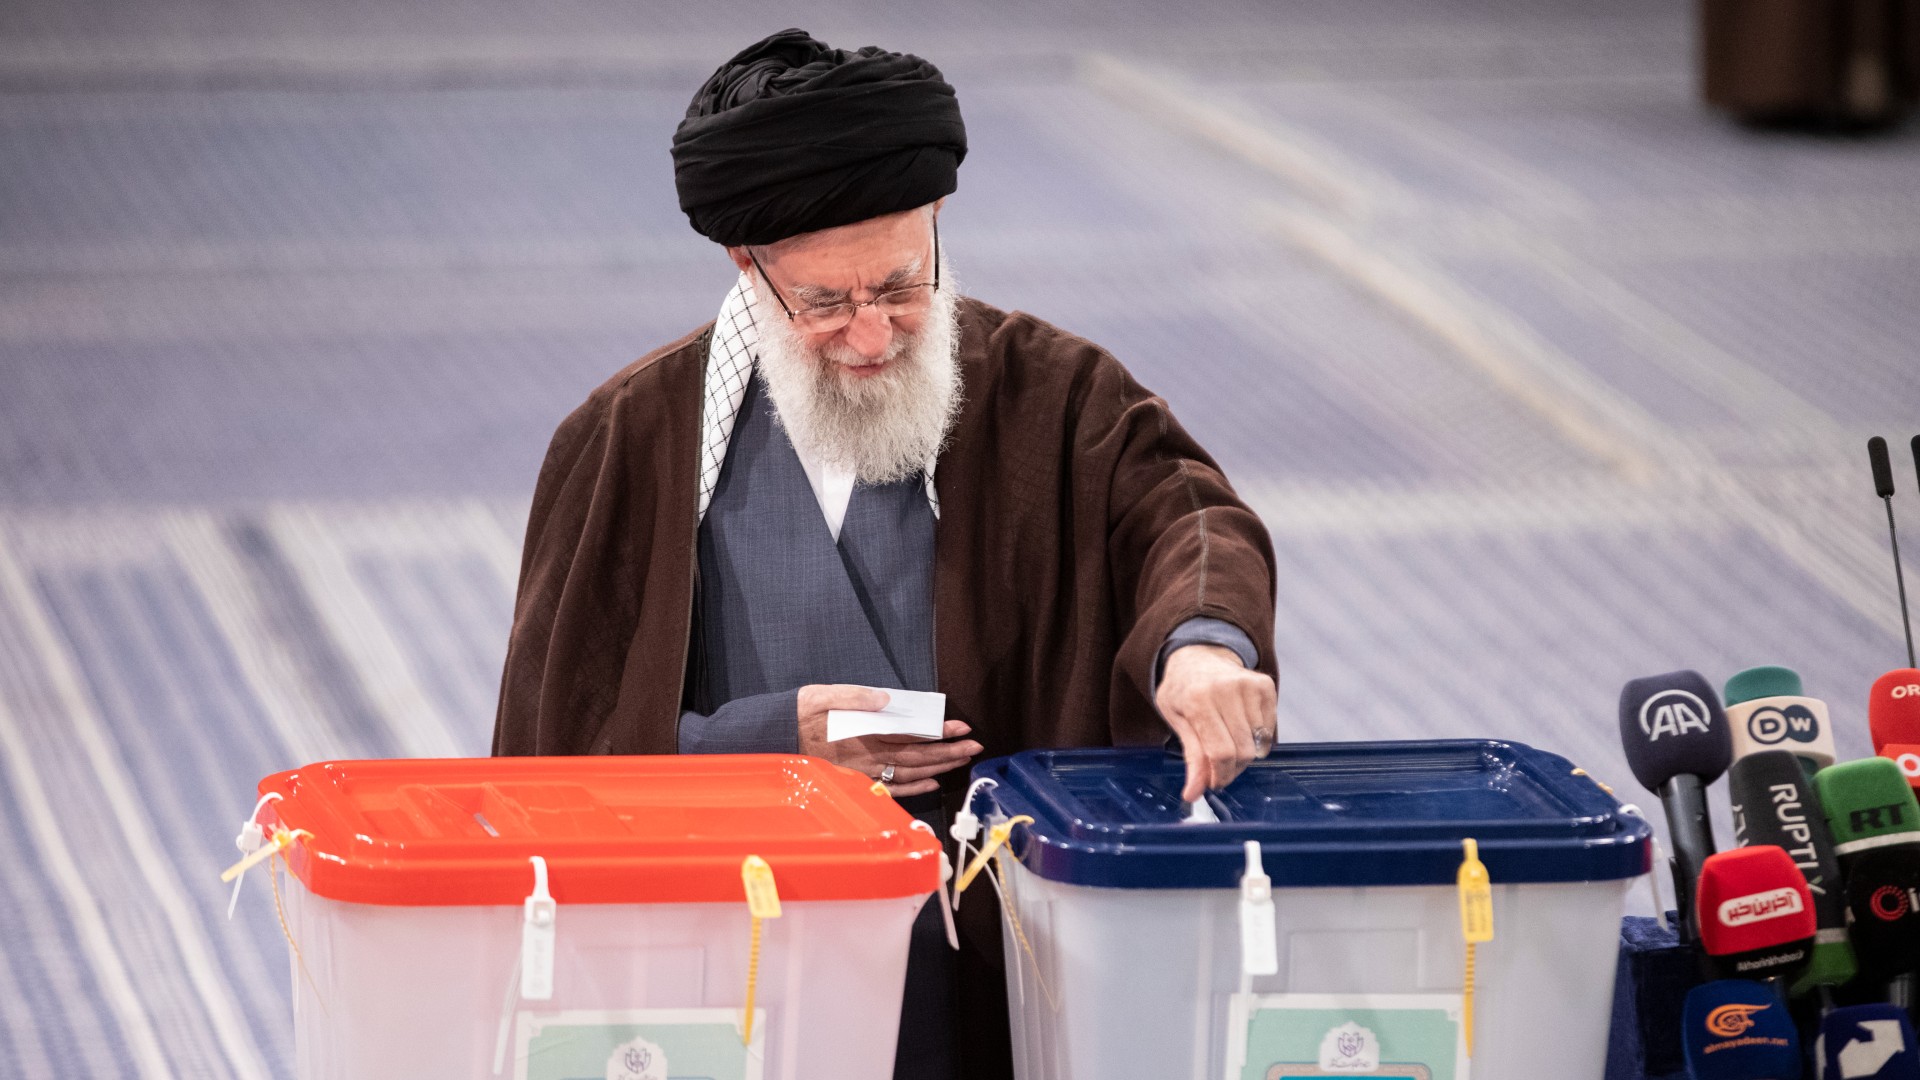 Ali Khamenei casts his votes in the Assembly of Experts elections on 1 March in Tehran (Reuters/Sobhan Farajvan)